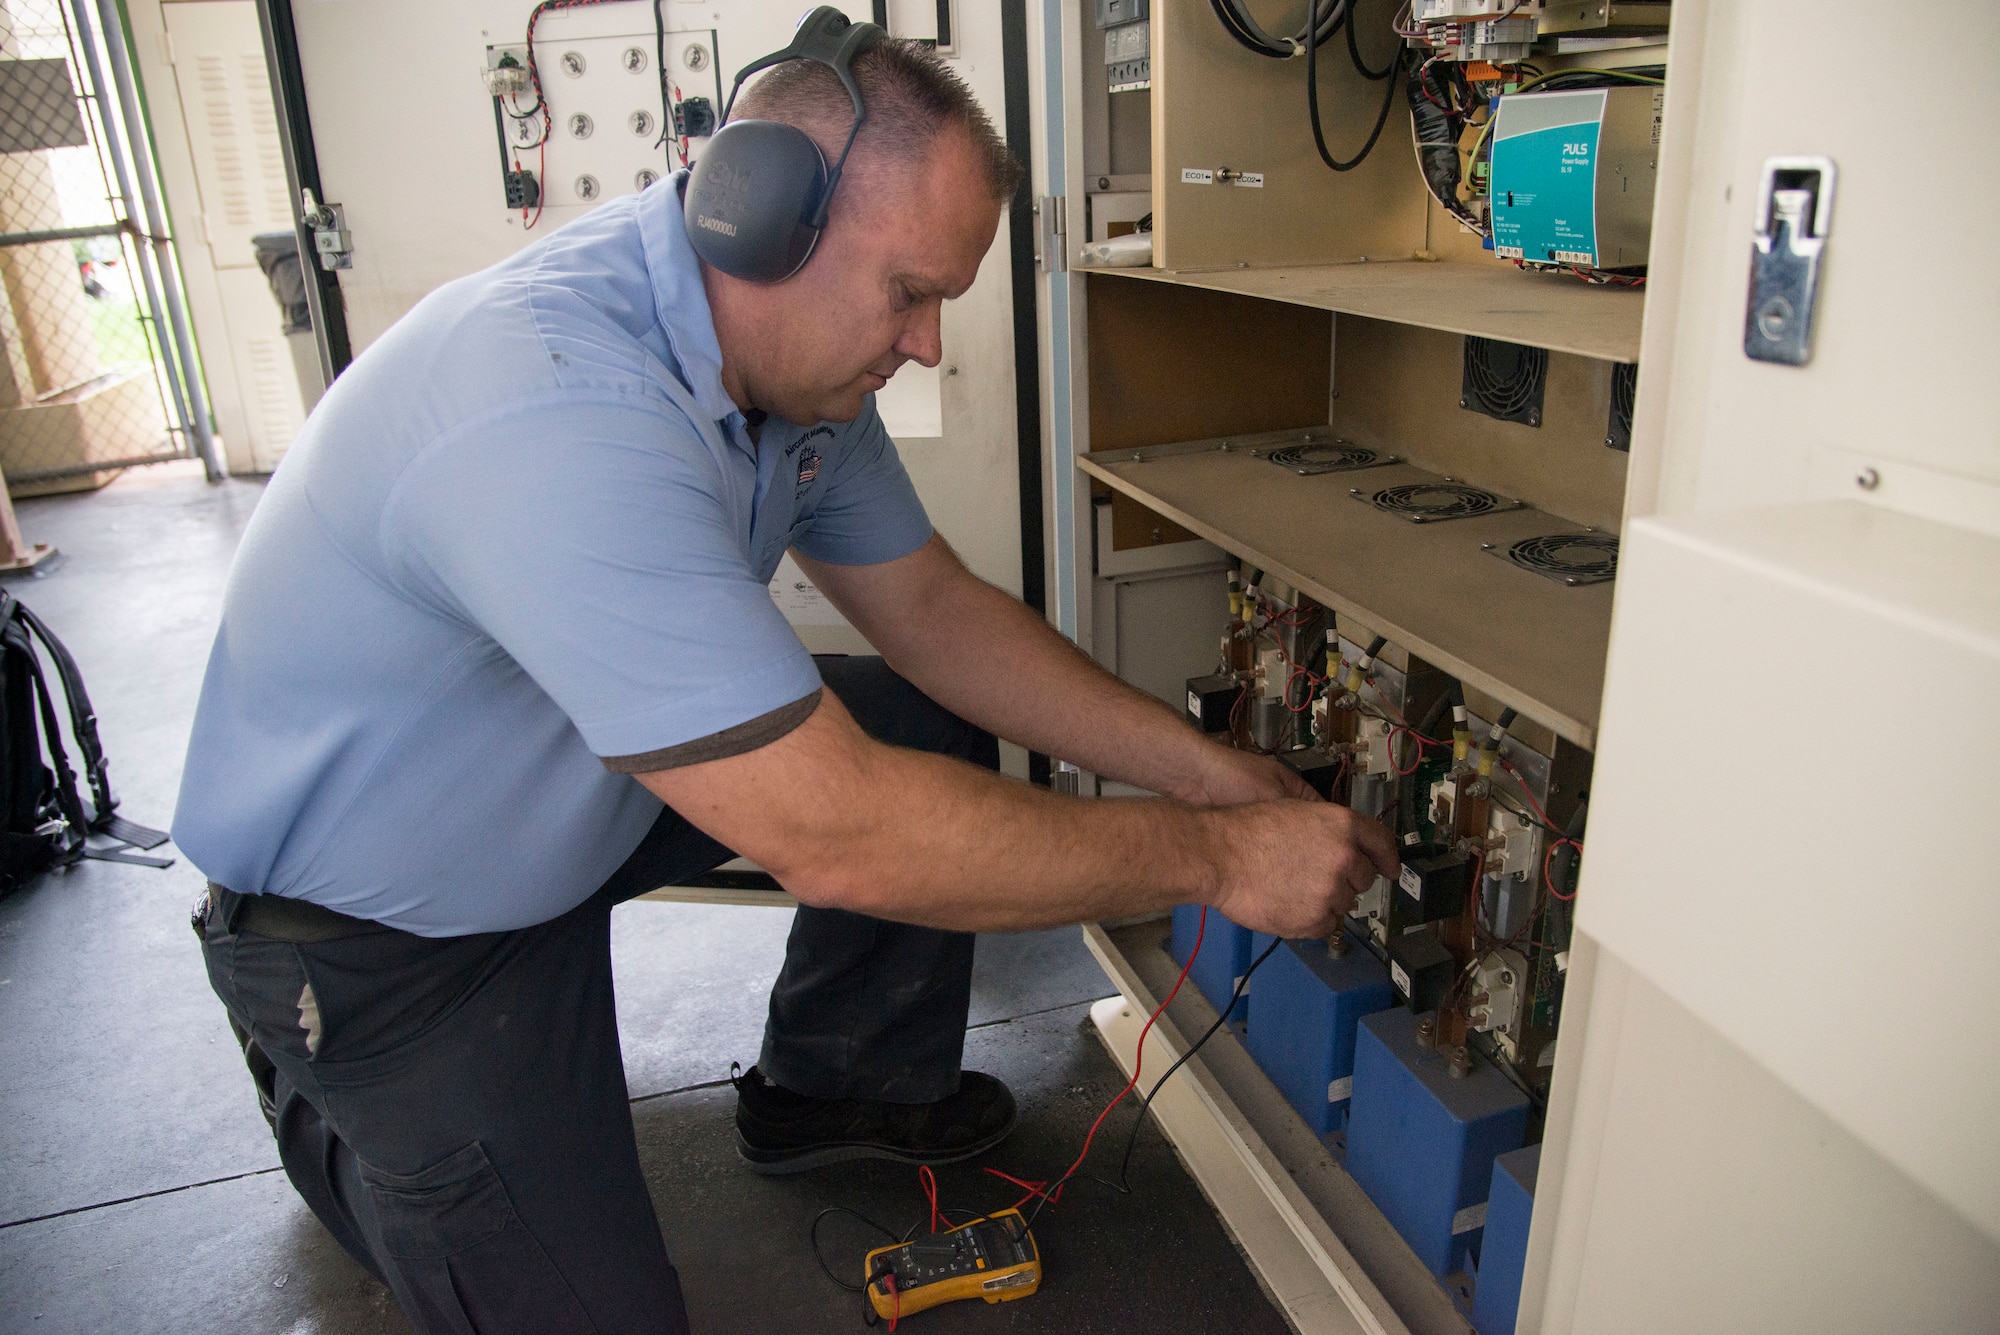 Gary Harris, 12th Flying Training Wing aerospace ground equipment mechanic, checks equipment voltage during routine maintenance Aug. 28, 2018, at Joint Base San Antonio-Randolph, Texas. Harris is part of a team that inspects, tests and maintains ground equipment that supports aircraft maintenance and flying training operations.